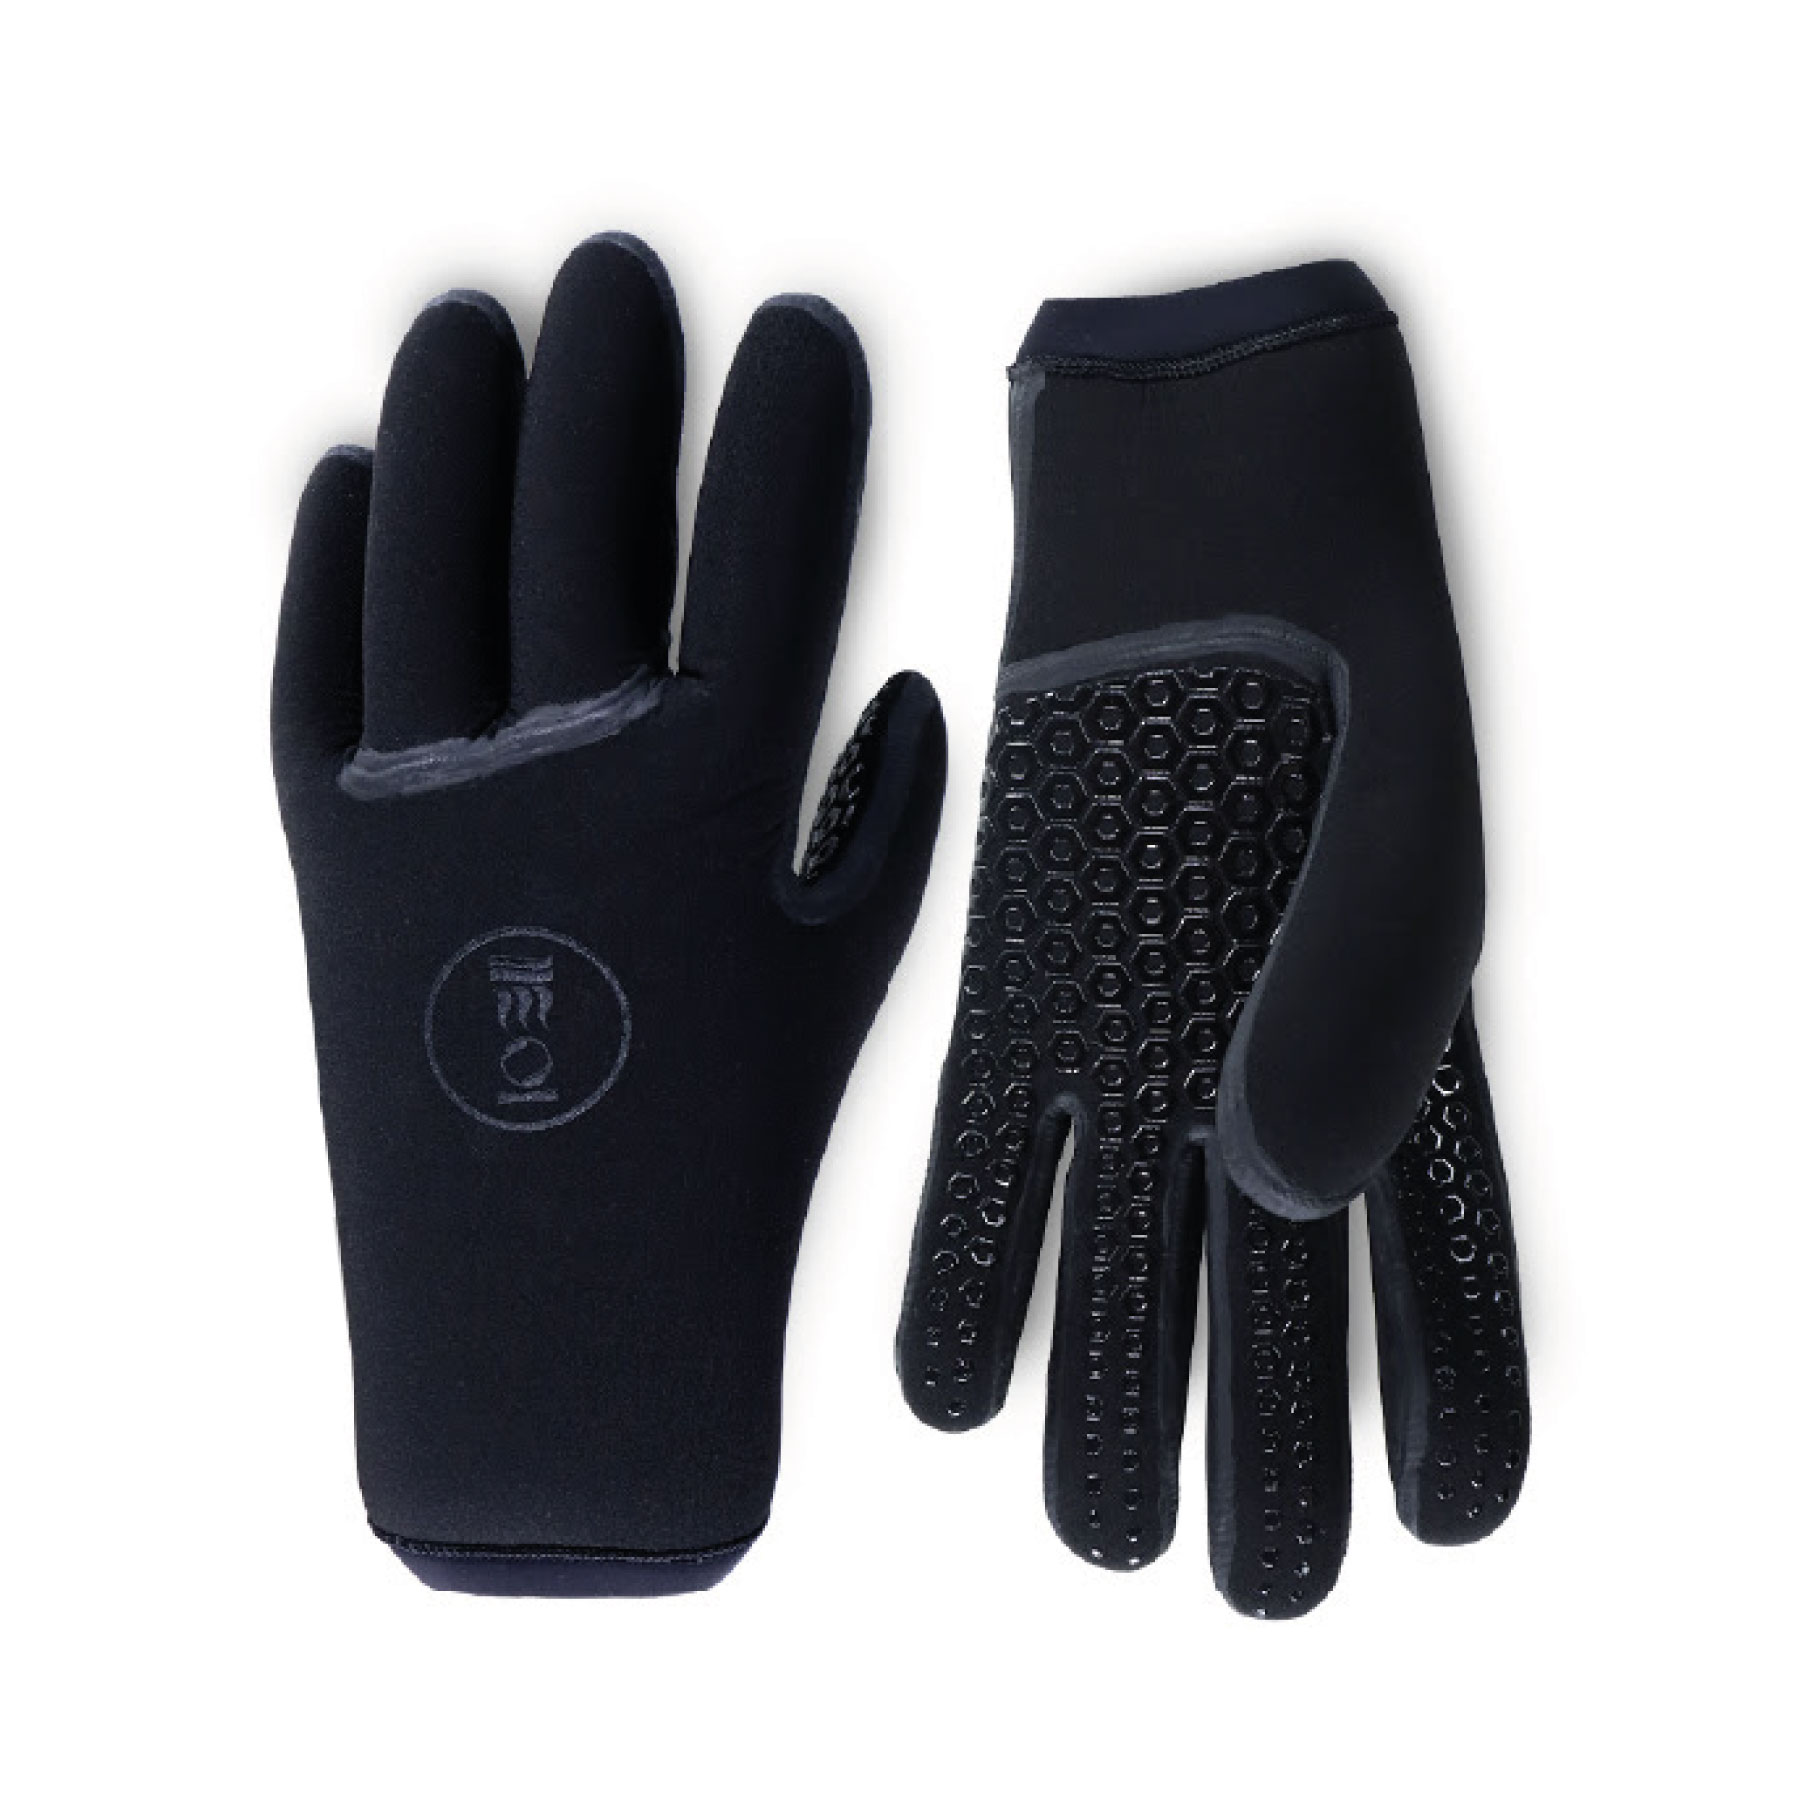 https://thehonestdiver.com/wp-content/uploads/2020/06/Fourth-Element-5mm-Diving-Gloves-Cold-Water.jpg